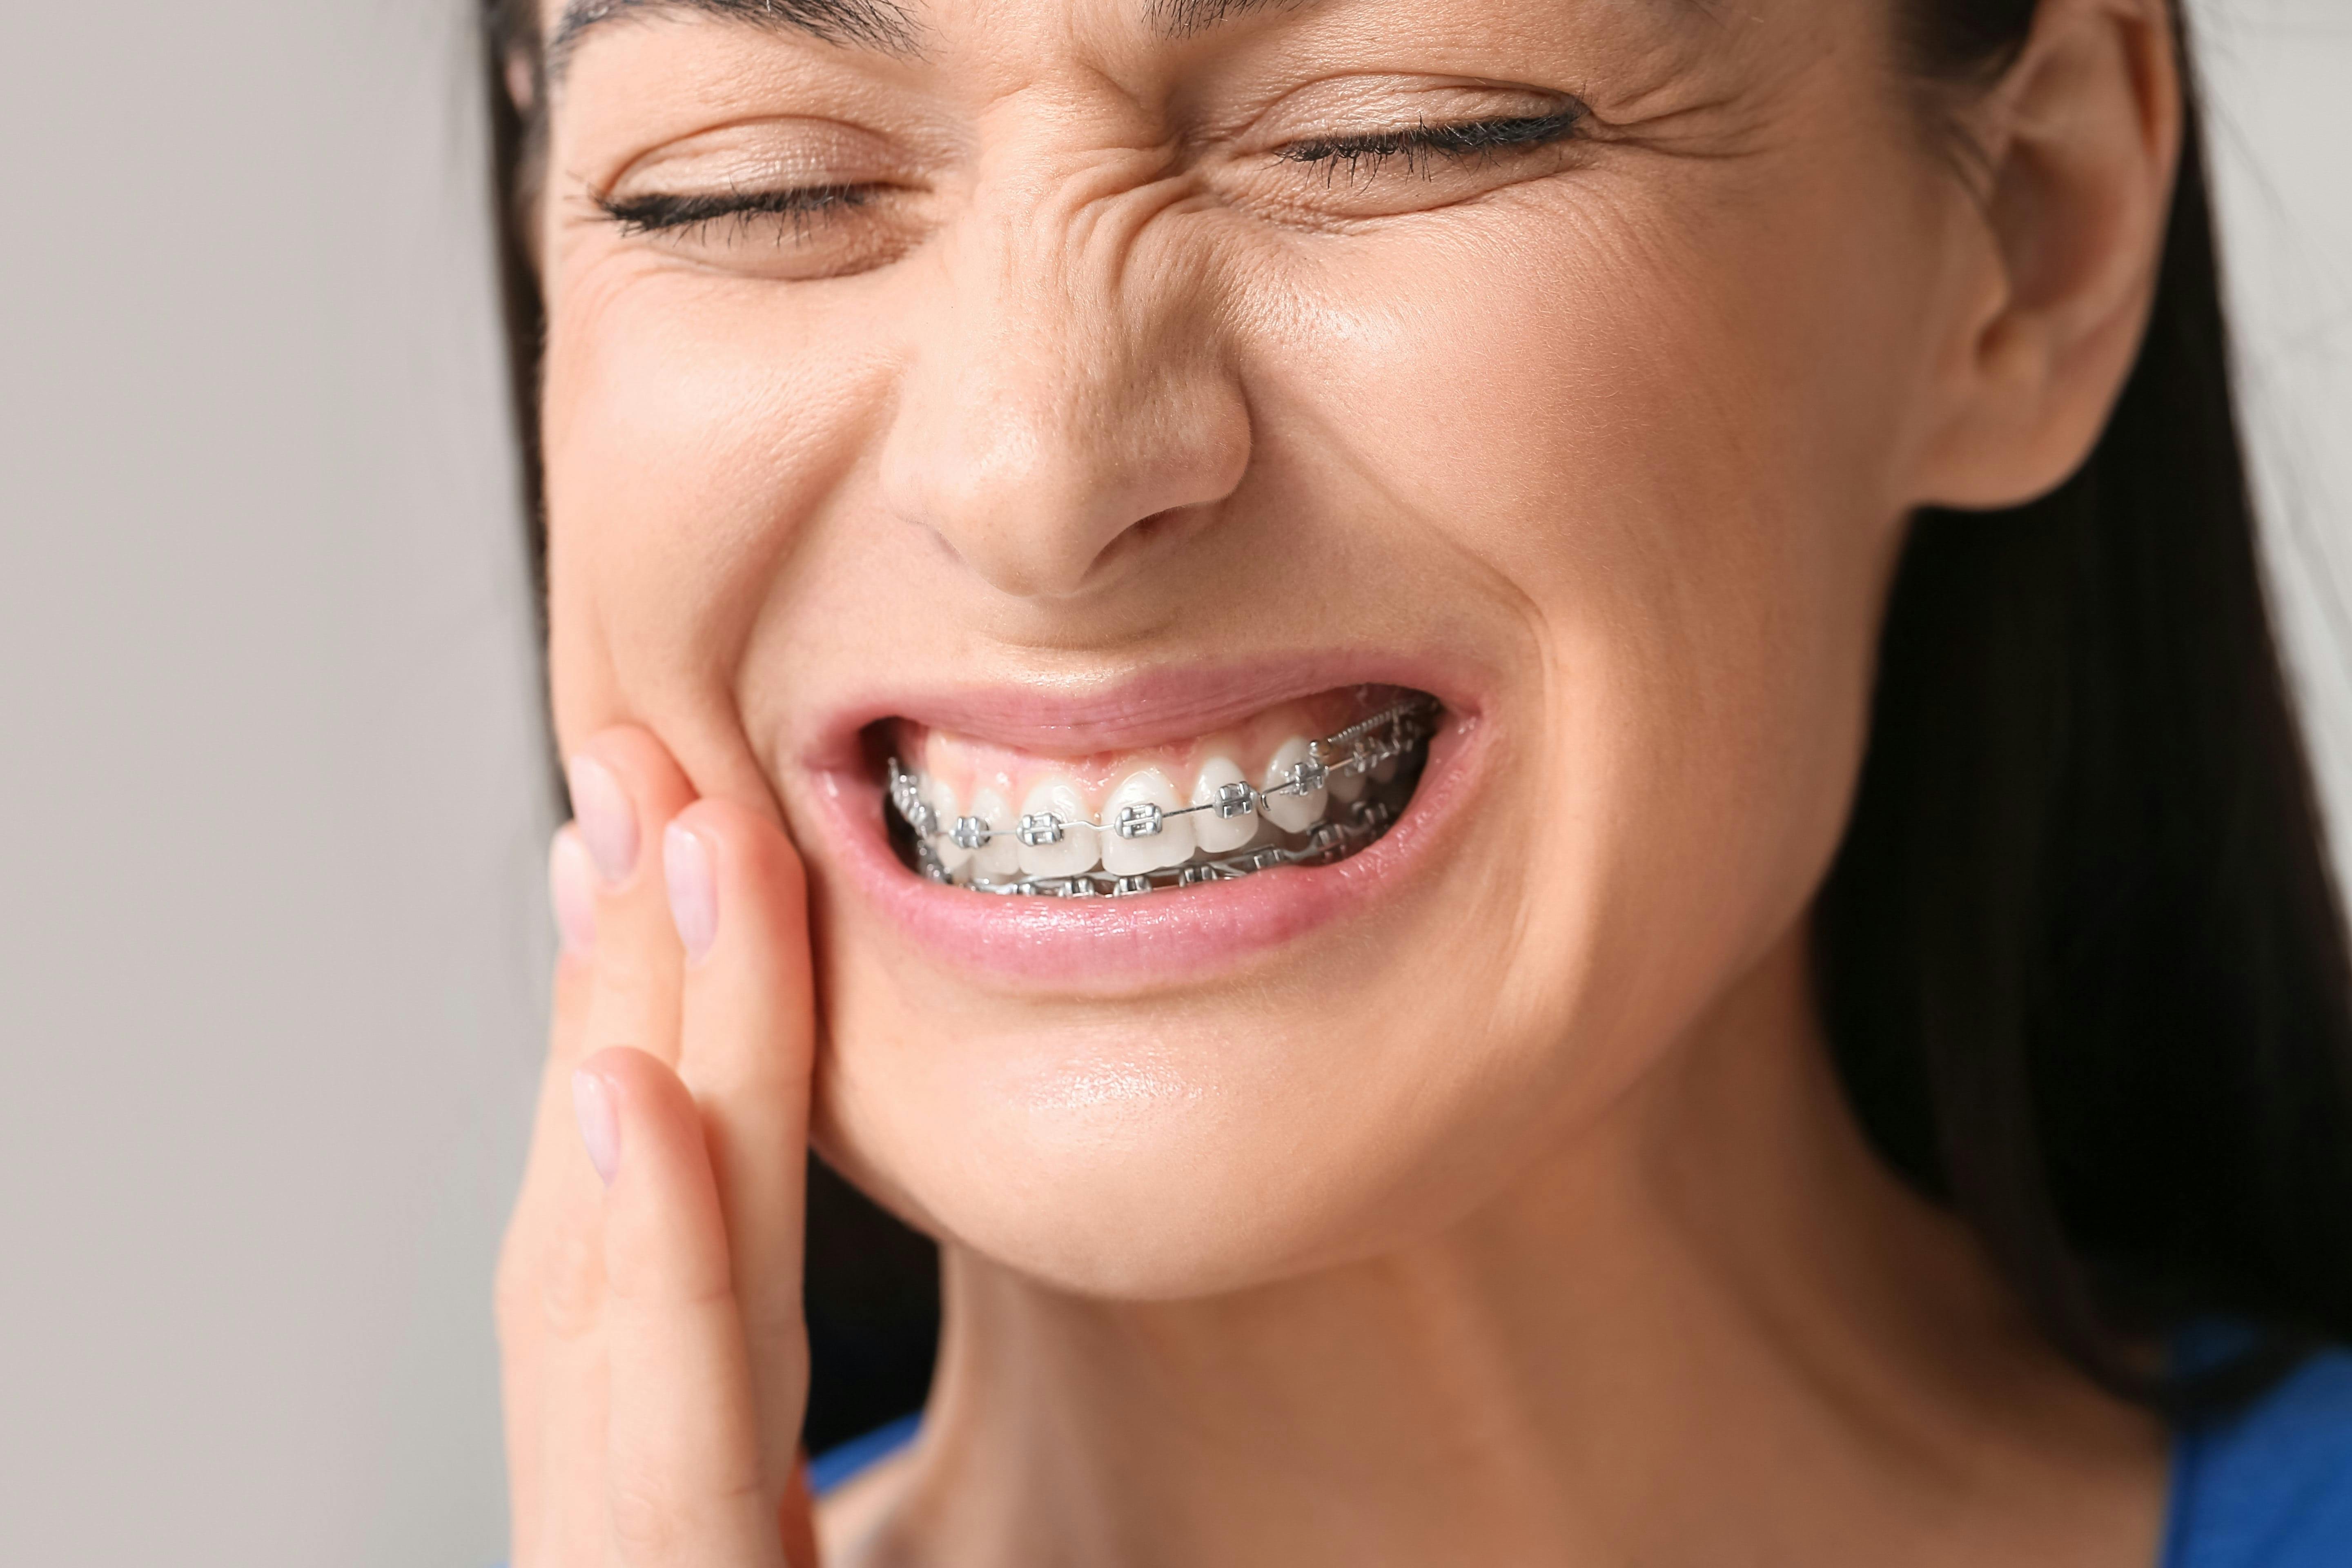 Woman experiencing pain from braces touches her jaw